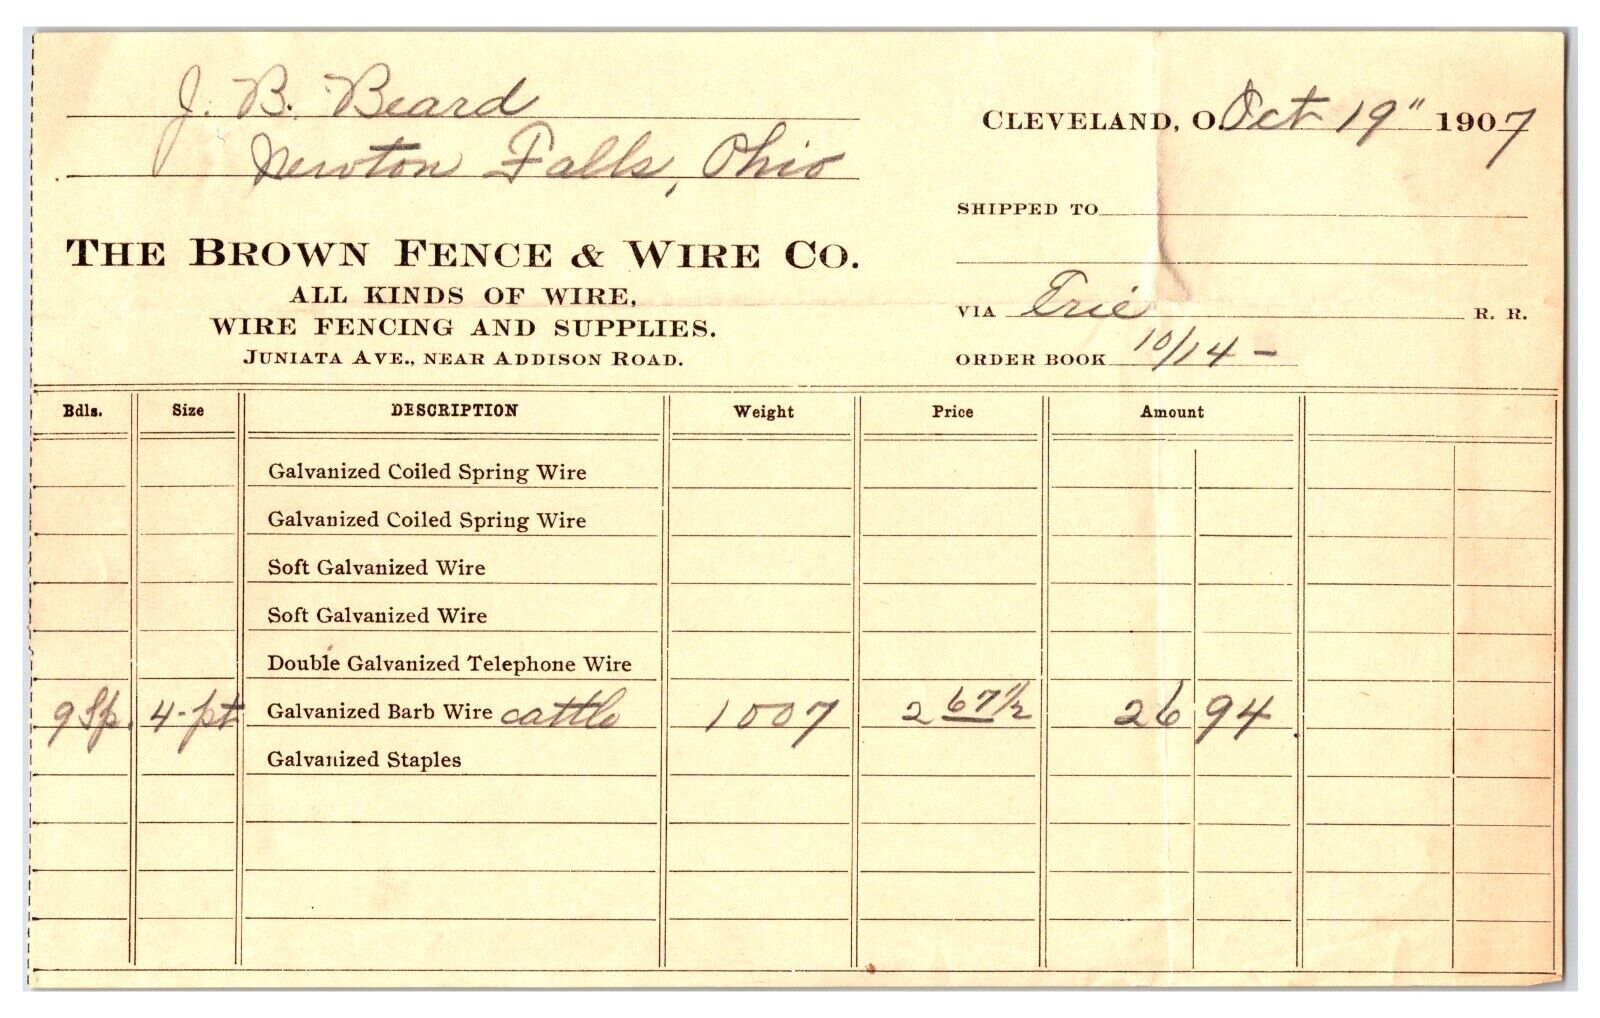 1907 - The Brown Fence & Wire Co. - Cleveland, Ohio - Store Receipt *Rare Paper*